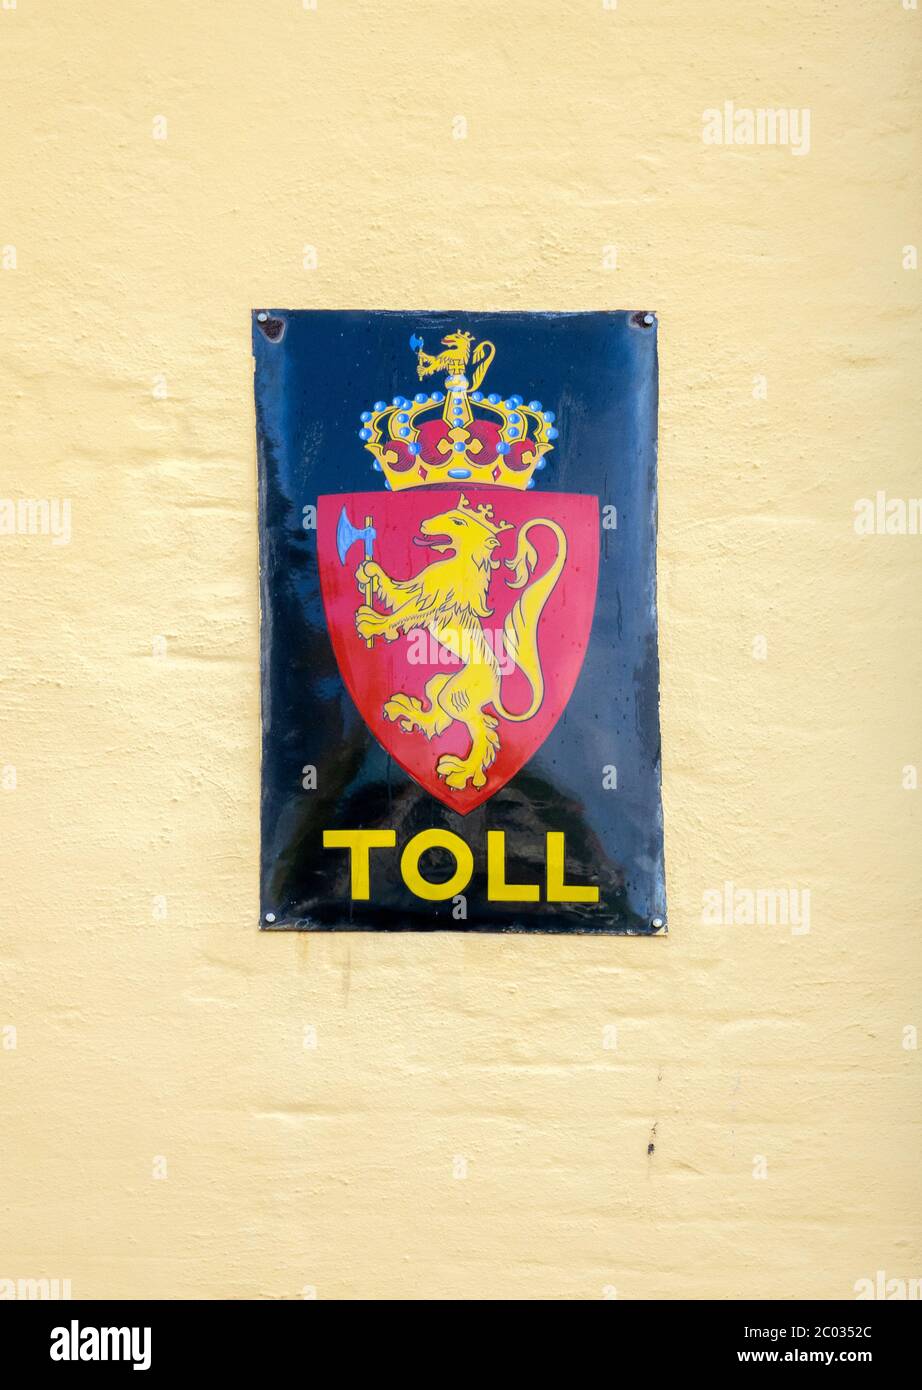 Norwegian Customs Toll Crest Sign At The Port In Kristiansand Norway Stock Photo